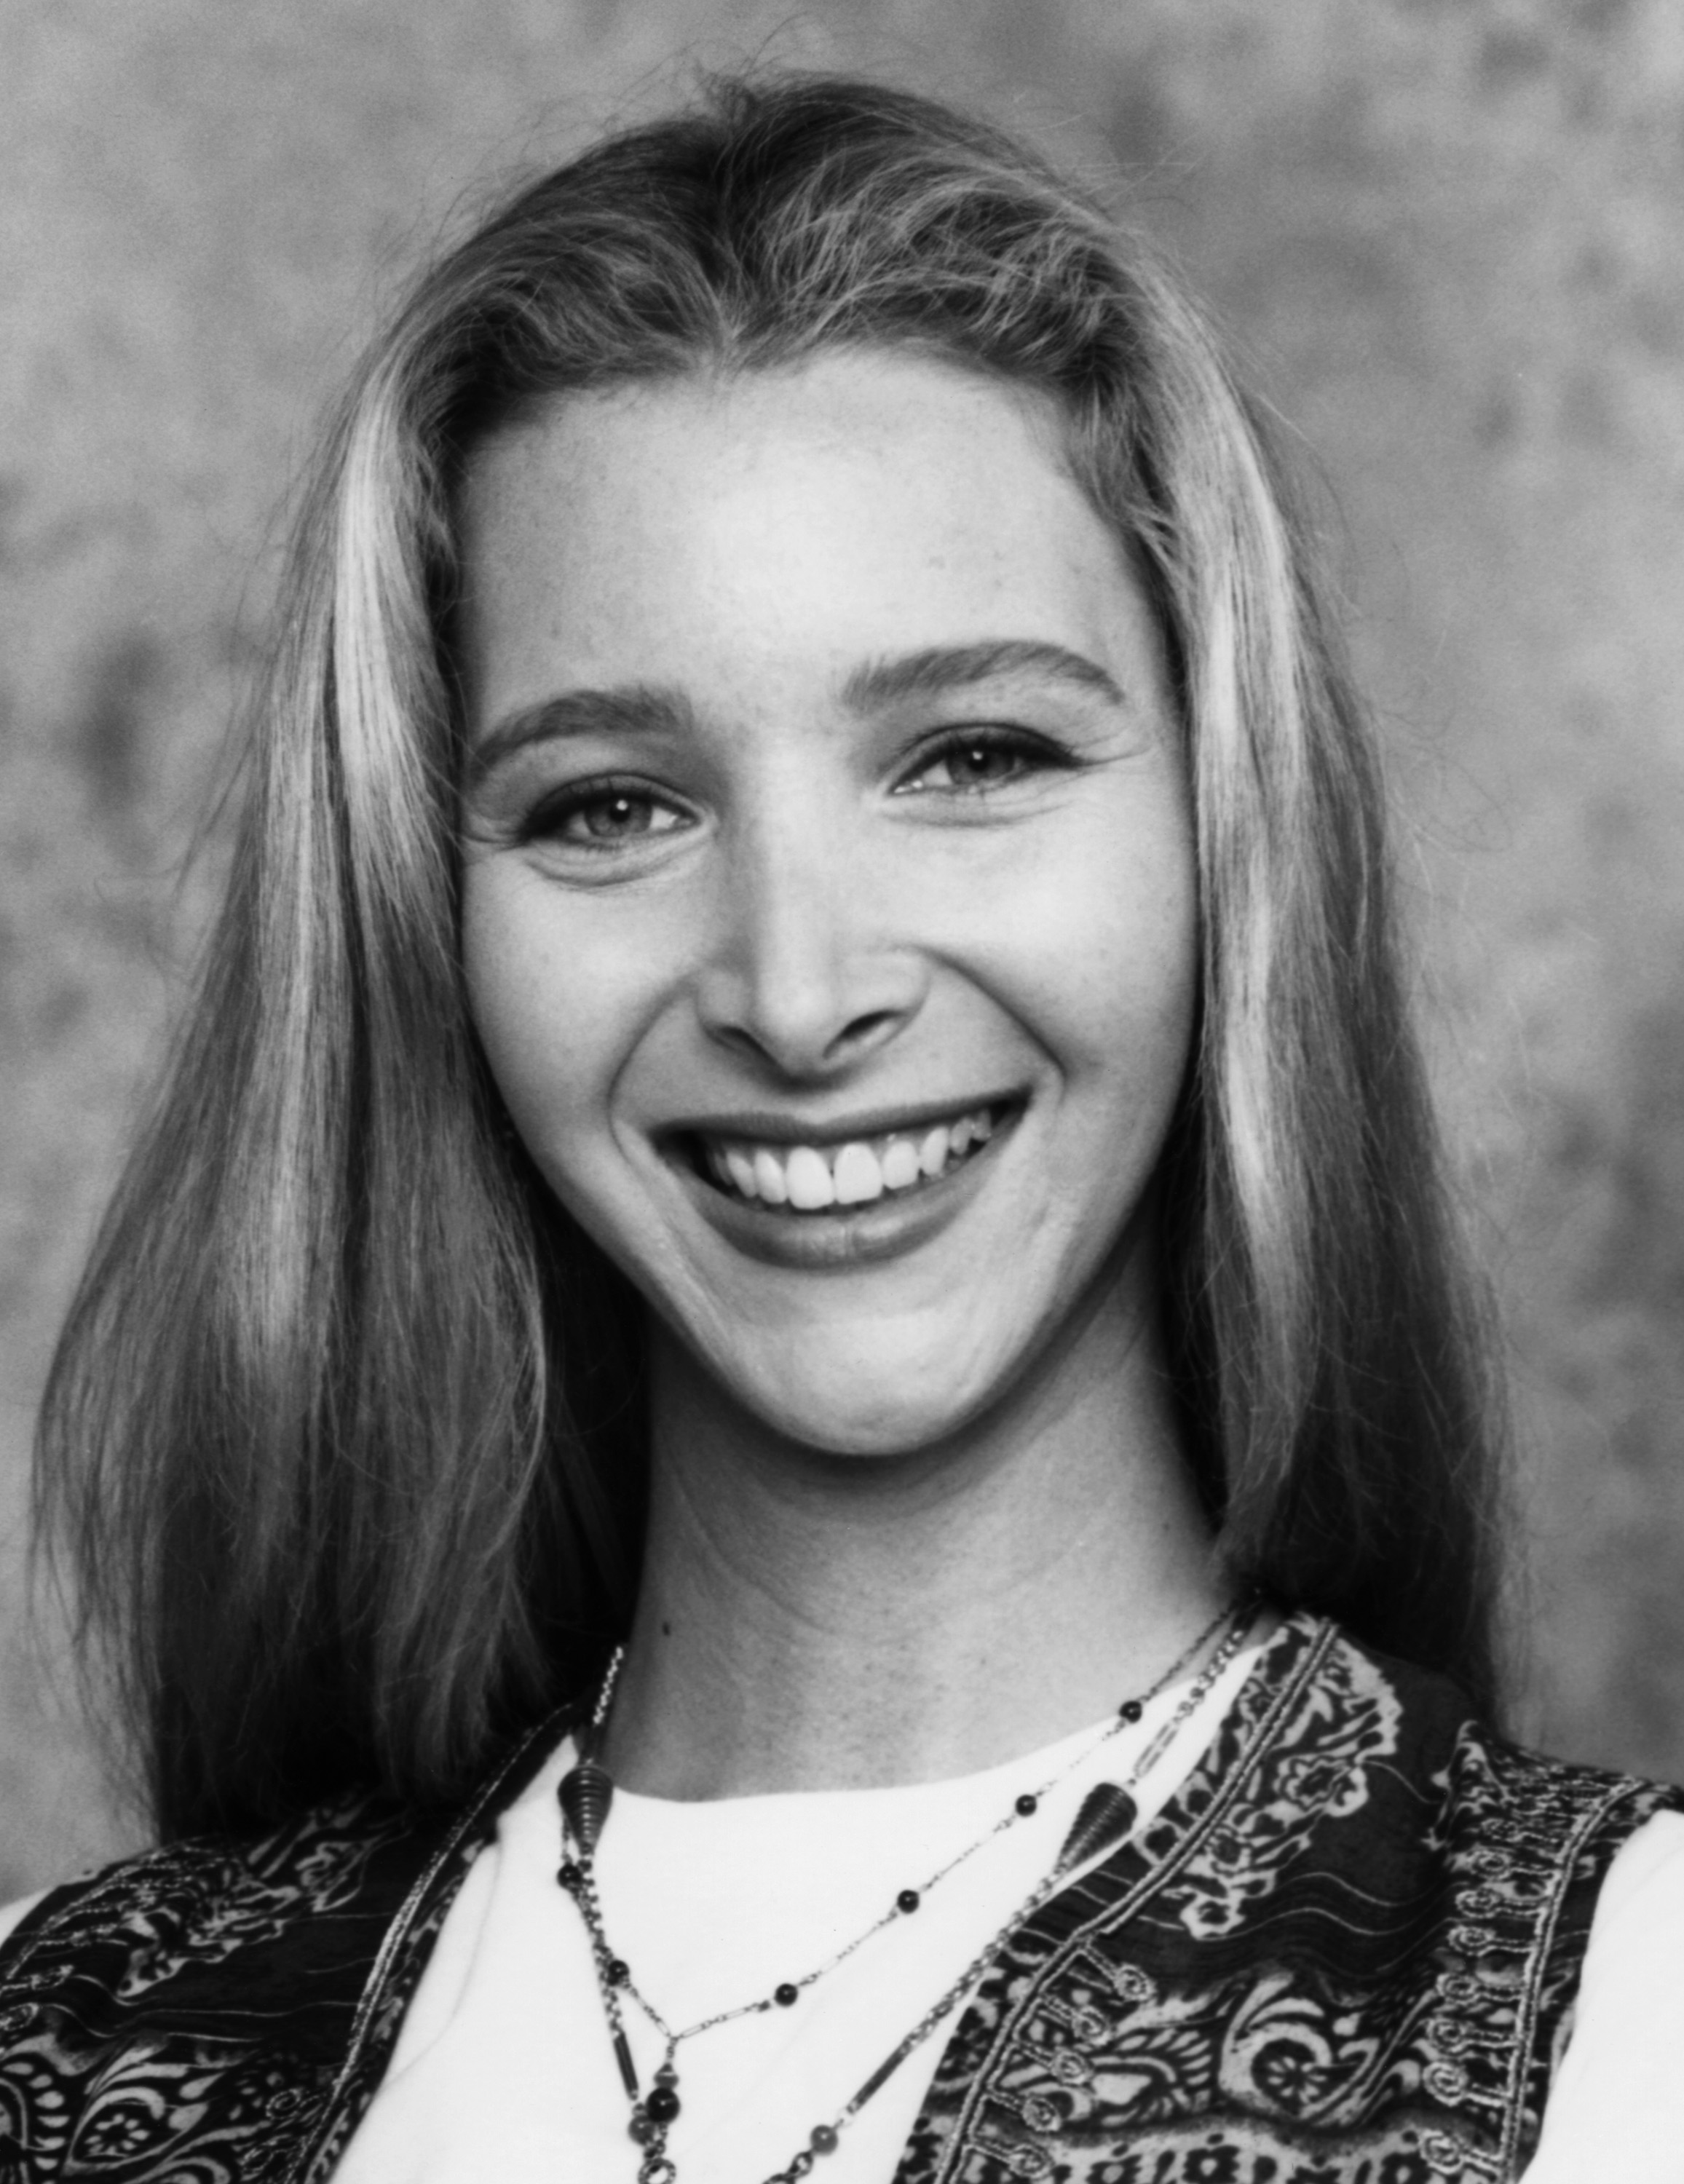 Lisa Kudrow as Phoebe Buffay from "Friends", on June 15 1994. | Source: Getty Images